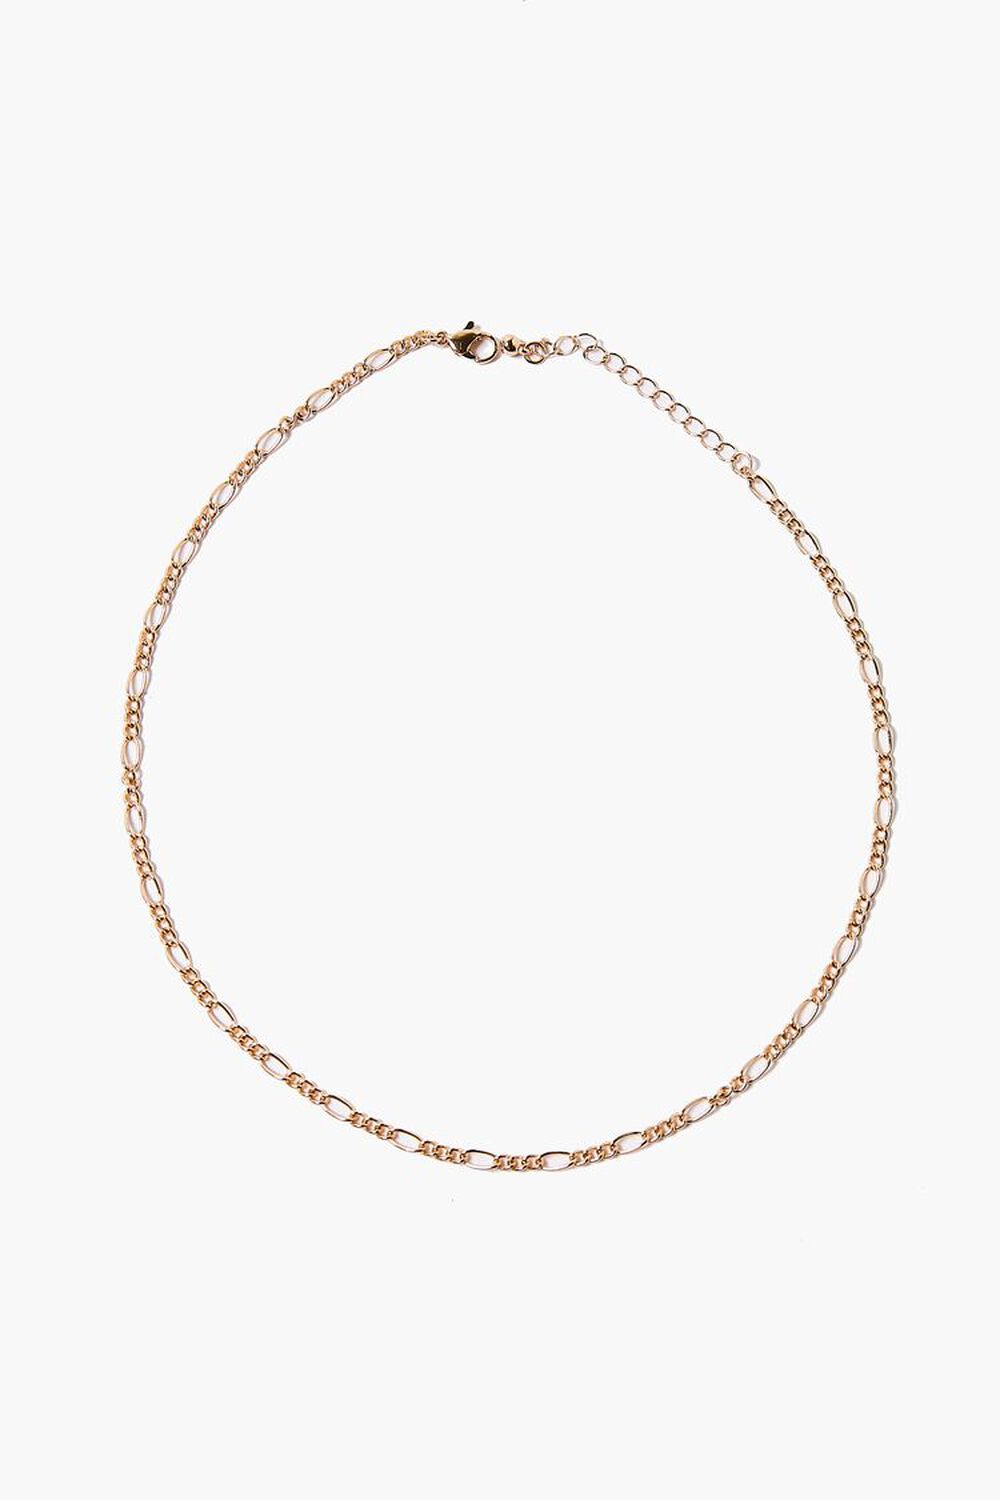 GOLD Curb Chain Necklace, image 1